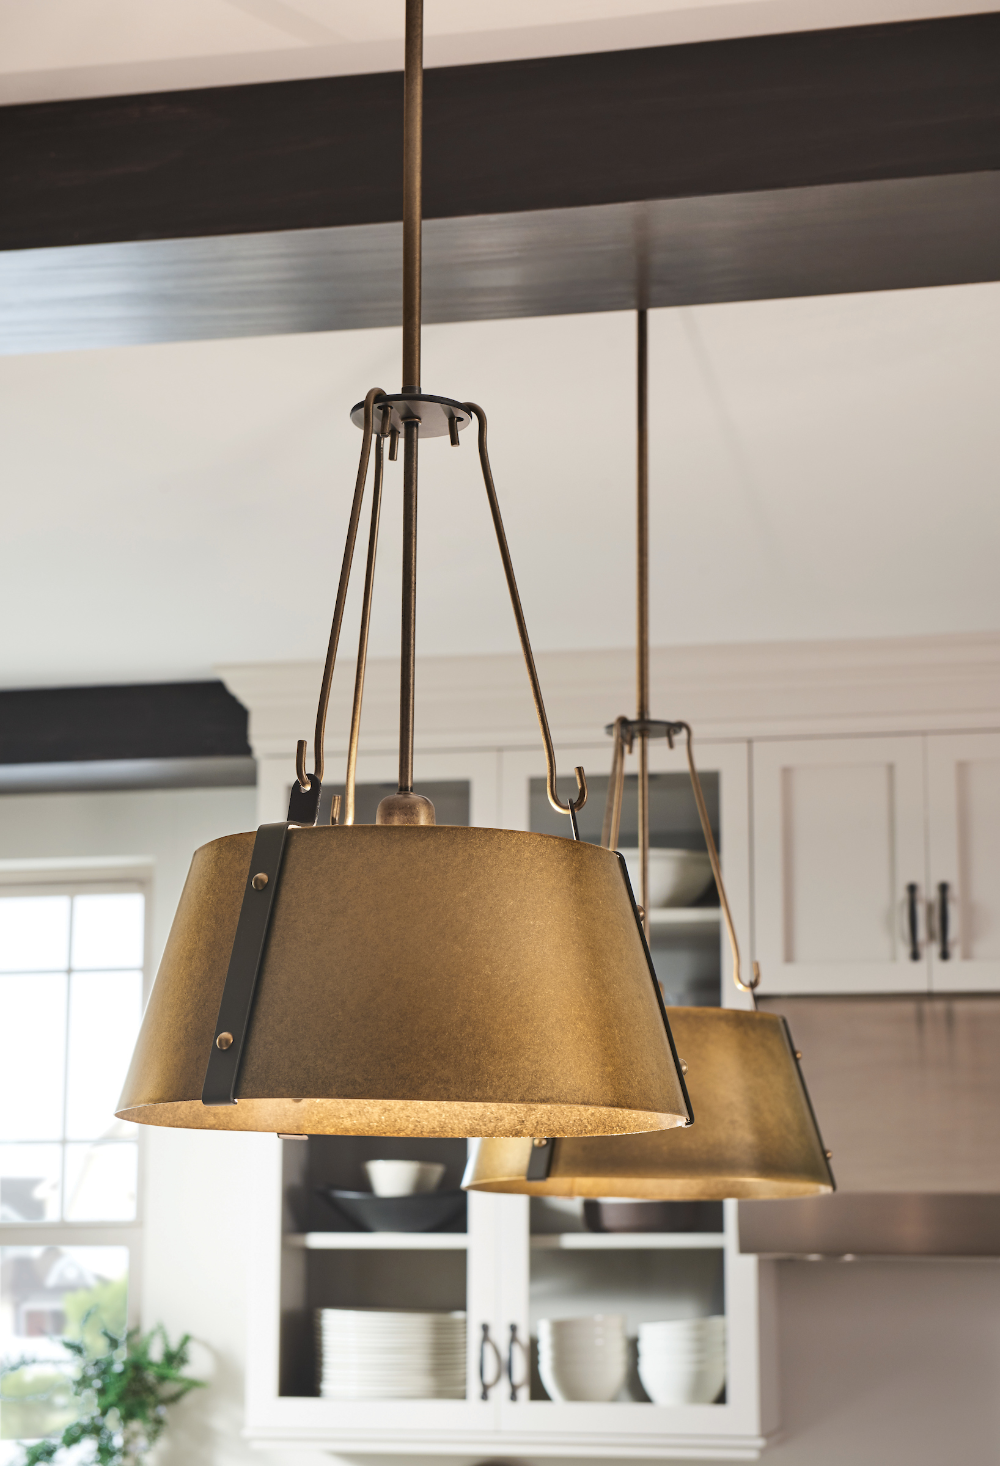 Hinkley Lighting Illuminate Your Space with Stunning High-Quality Lighting Options